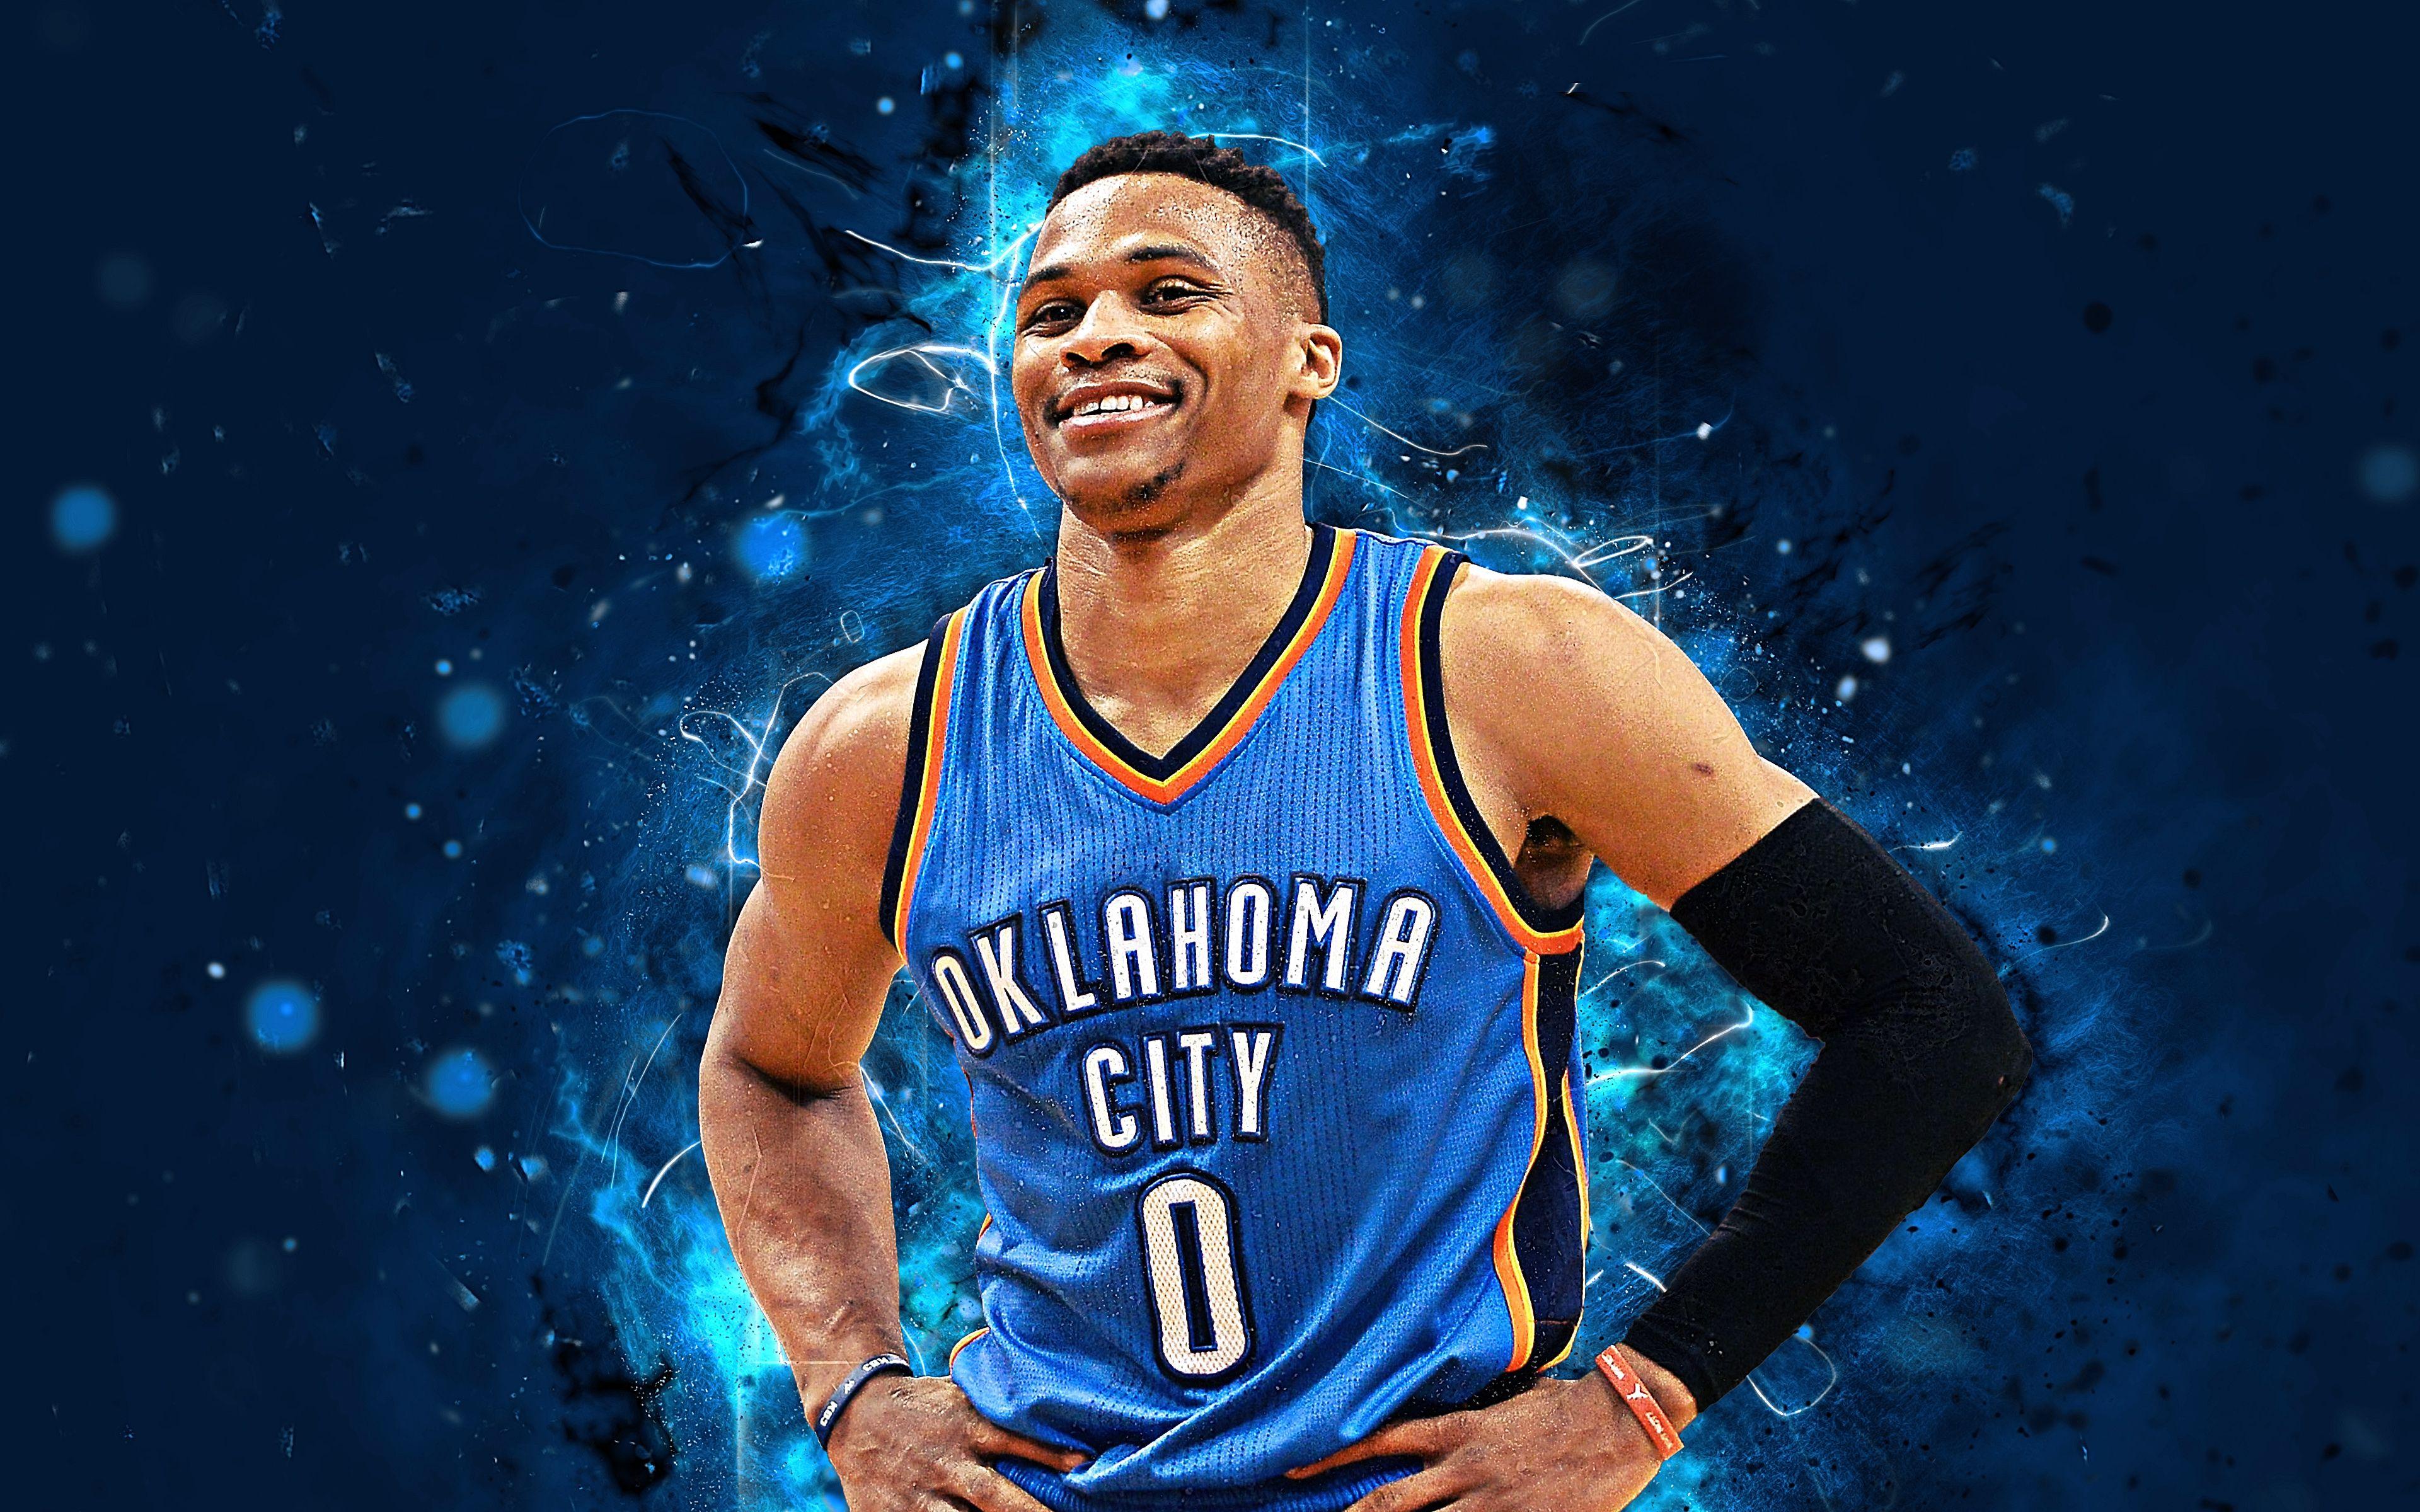 Russell Westbrook Wallpaper iPhone 68 images